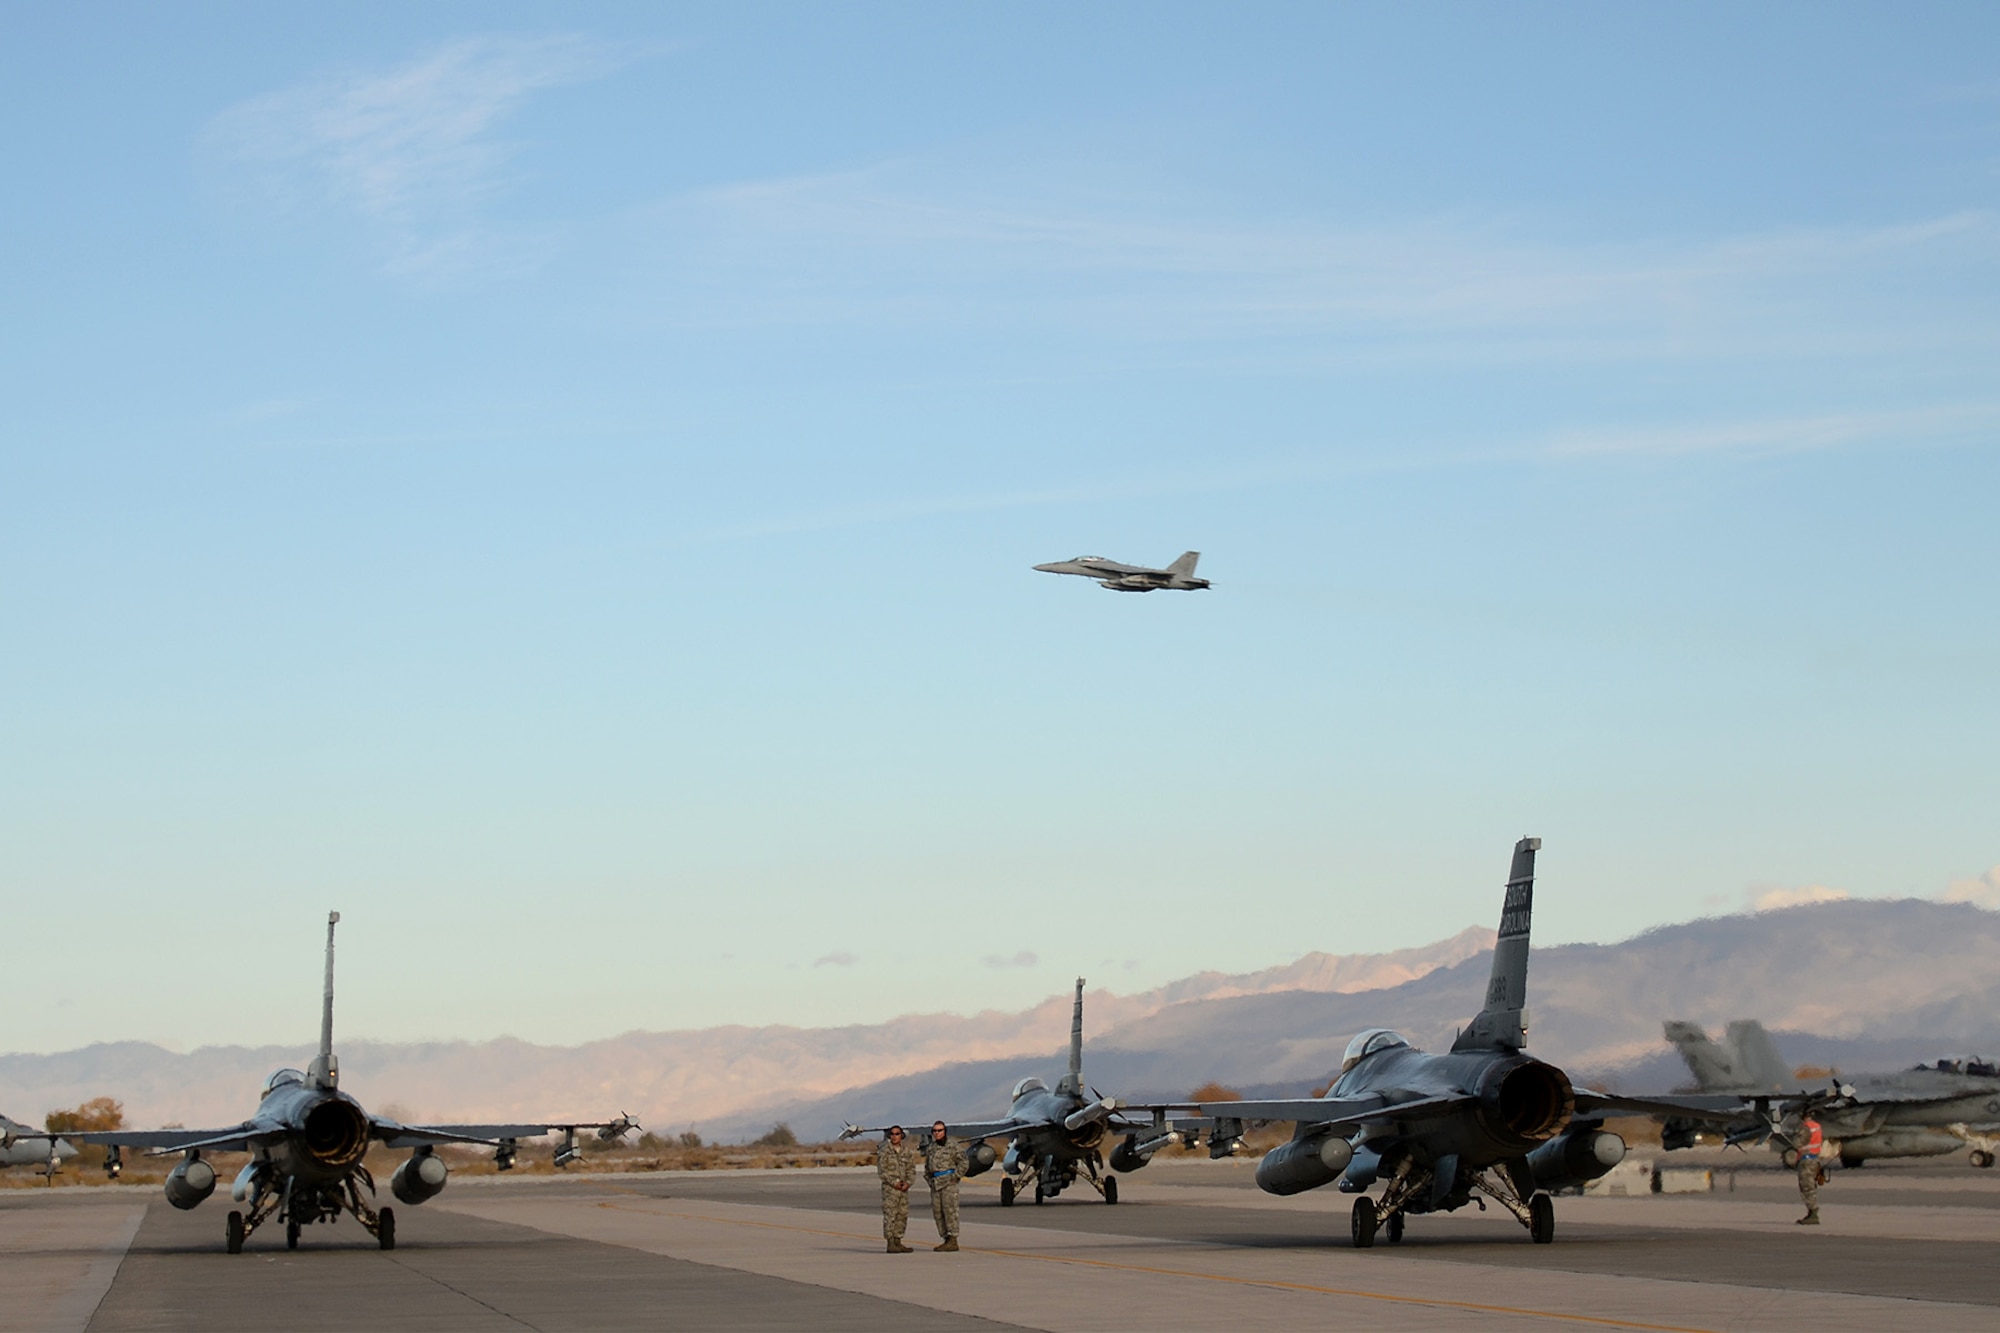 U.S. Air Force fighter pilots from the 157th Fighter Squadron at McEntire Joint National Guard Base, S.C., wait on the flight line to taxi and launch F-16 Fighting Falcon fighter jets for a training mission from Naval Air Station Fallon, Nevada, Nov. 13, 2014. Swamp Fox Airmen from the 169th Fighter Wing and South Carolina Air National Guard are deployed to NAS Fallon to support Naval Carrier Air Wing One with pre-deployment fighter jet training, integrating the F-16’s suppression of enemy air defenses (SEAD) capabilities with U.S. Navy fighter pilots.   (U.S. Air National Guard photo by Tech. Sgt. Caycee Watson/RELEASED)